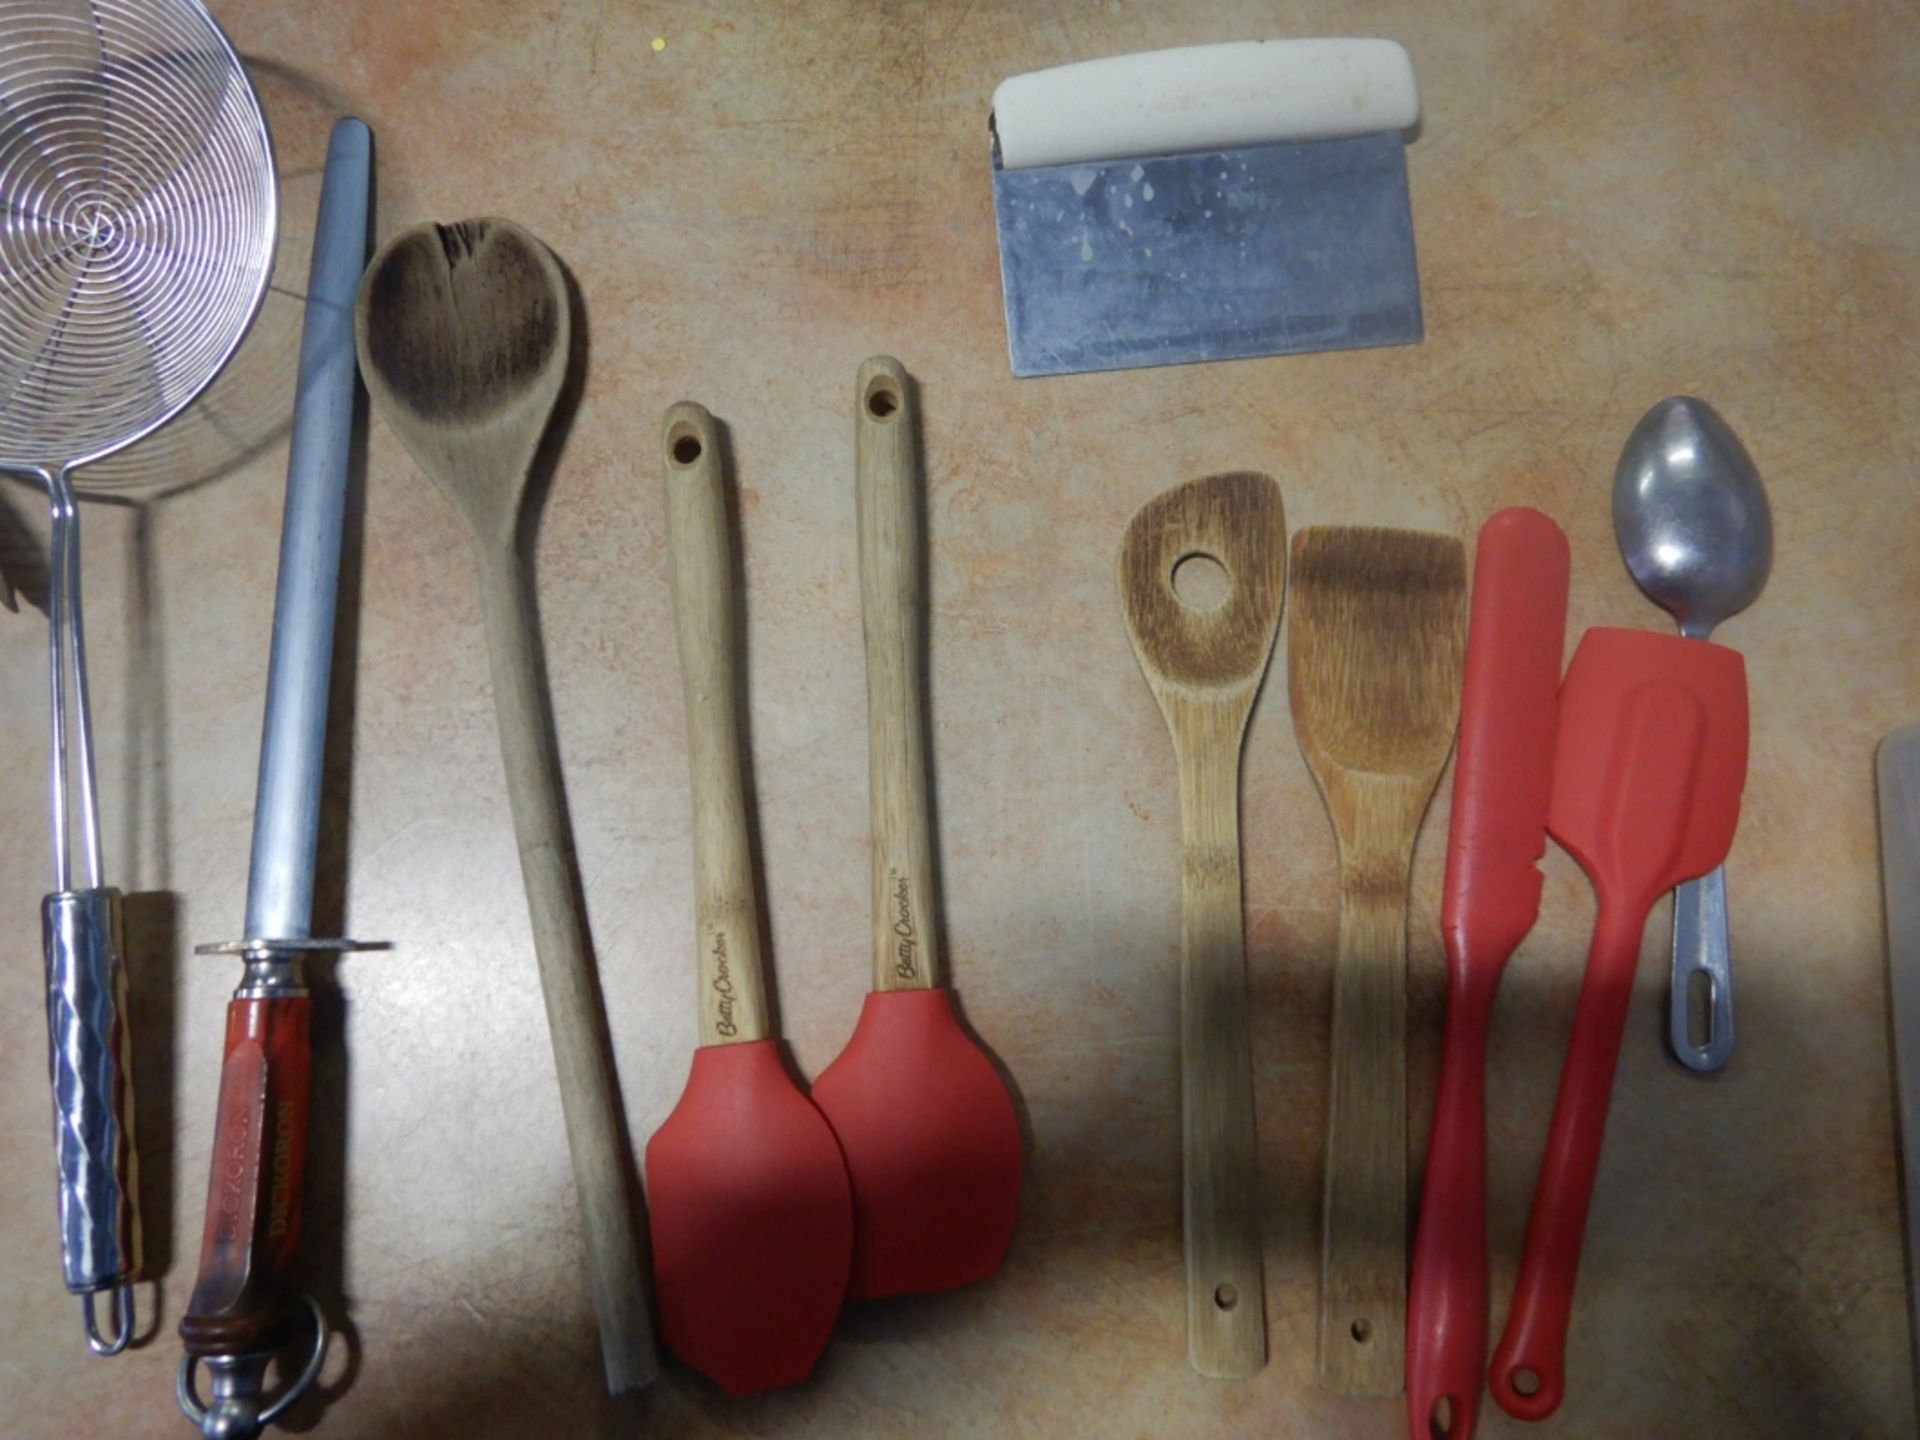 L/O ASSORTED SERVING SPOONS, SHARPENING STONES, MIXERS, ICE CREAM SCOOP, ETC. - Image 4 of 7